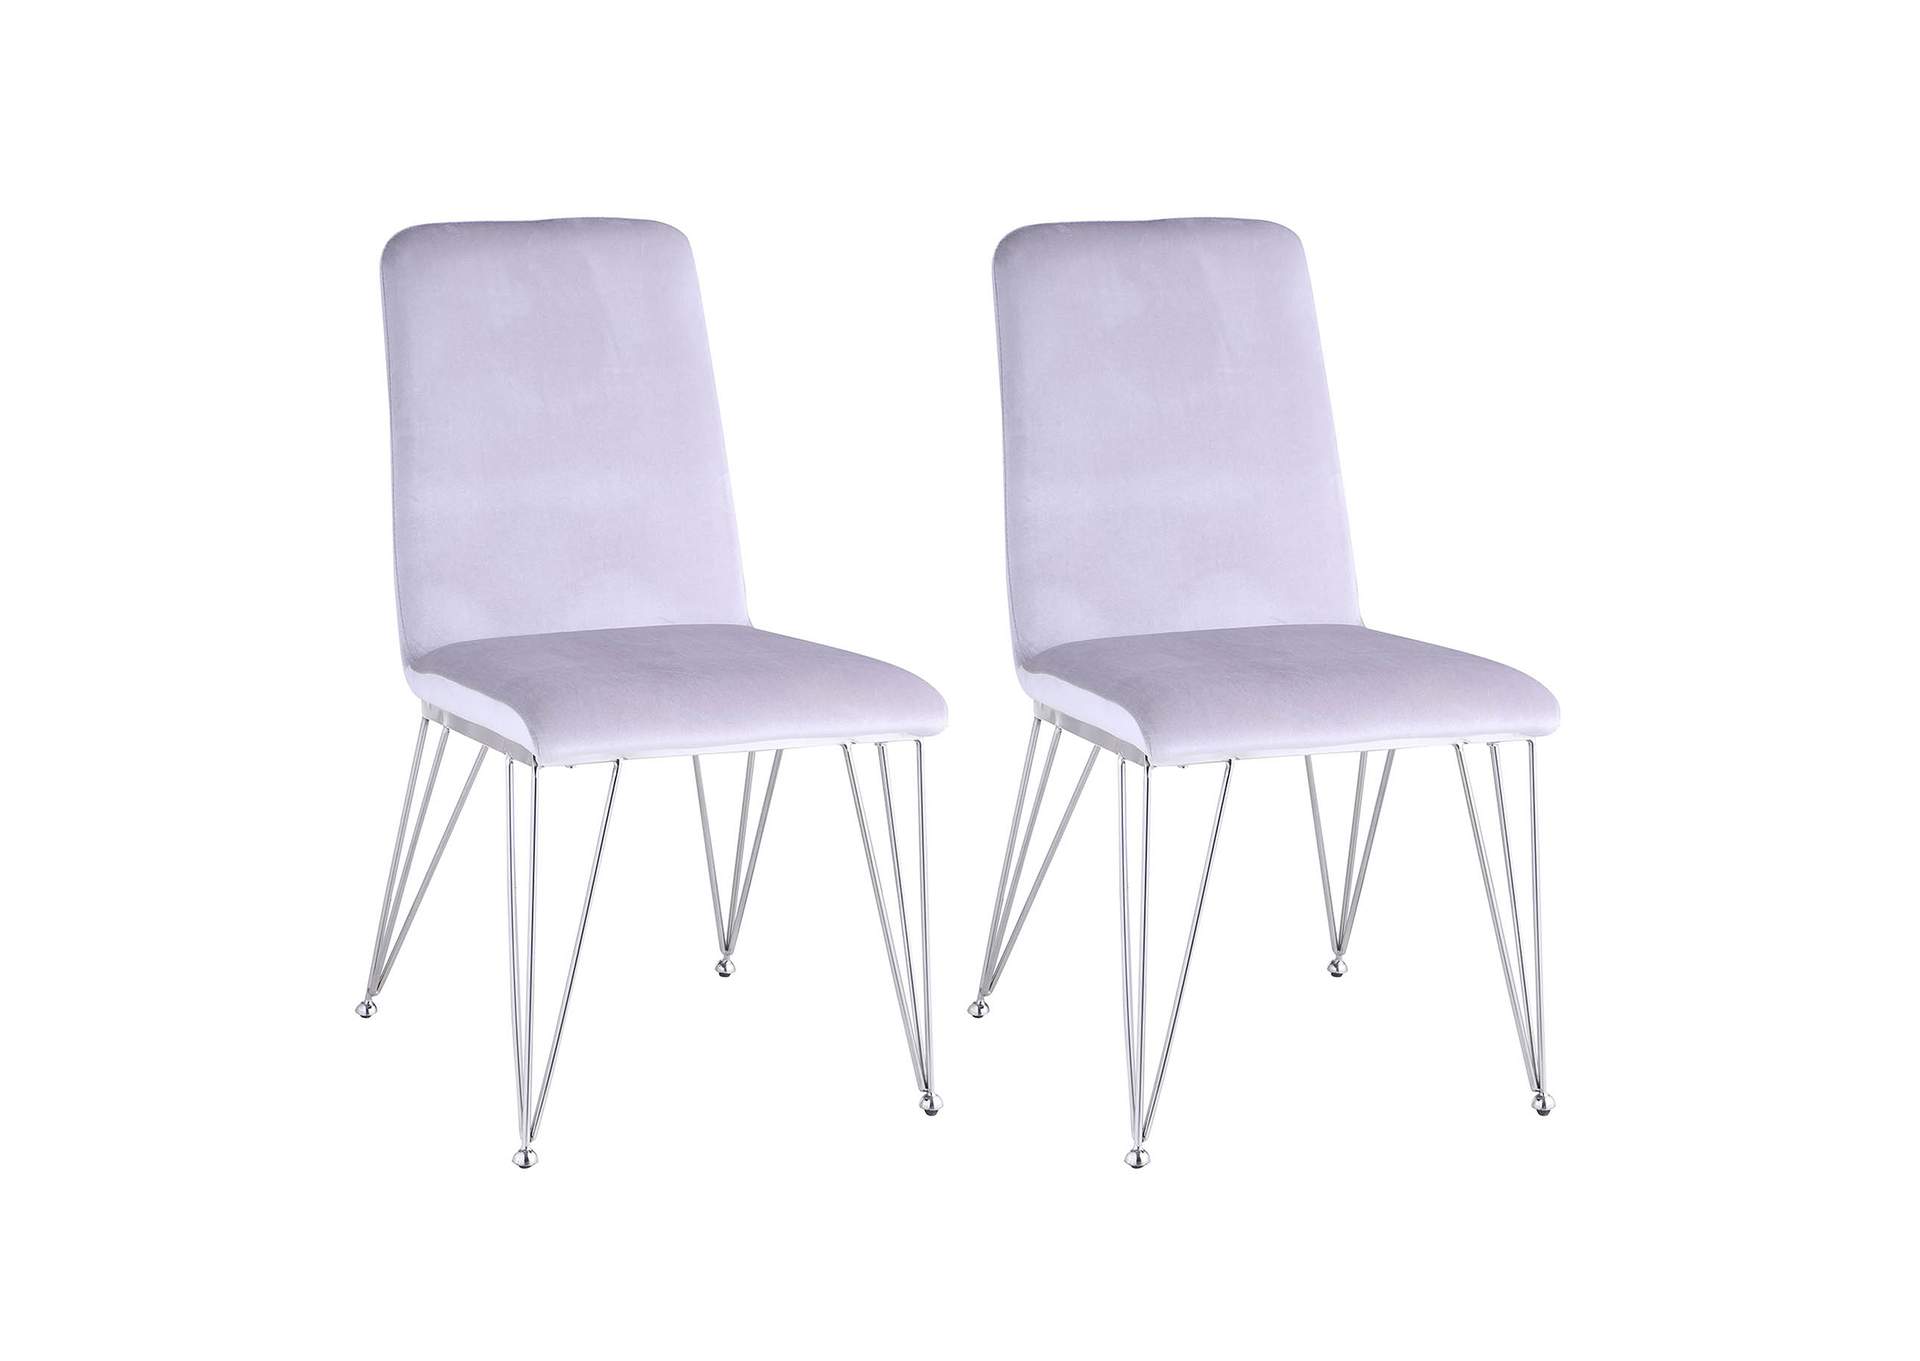 Contemporary Upholstered Side Chair,Chintaly Imports